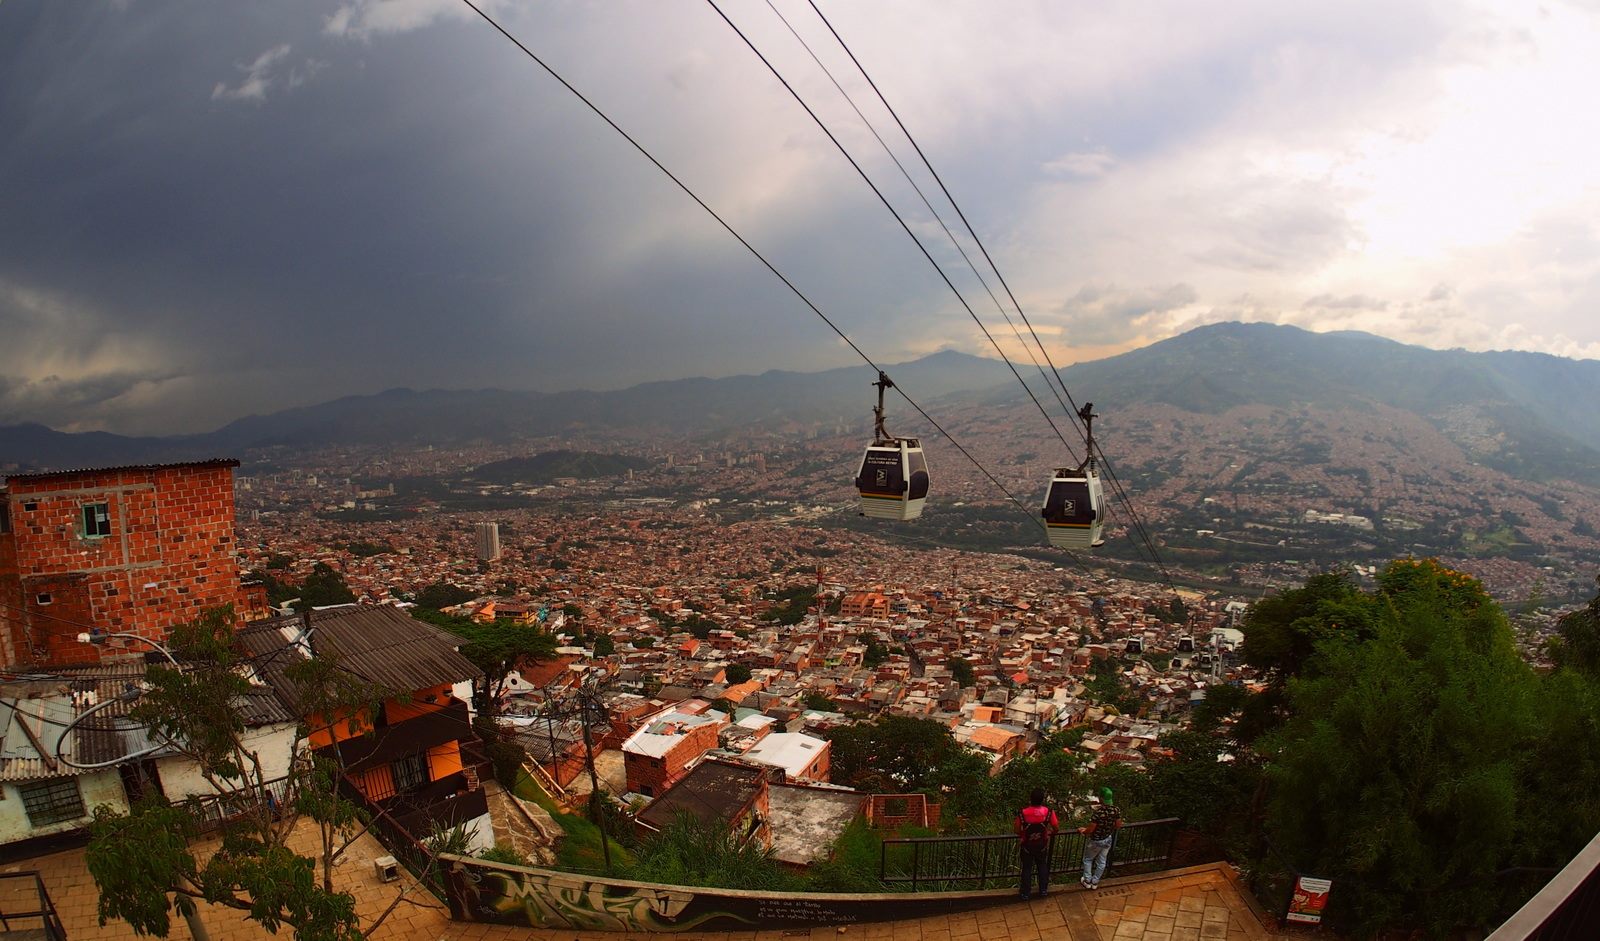 Medellin, Colombia, has been through a lot, and, while it certainly has a lot further to go, the city is making progress on how to tackle large issues, market itself as a destination, and tell the story it wants to tell. 